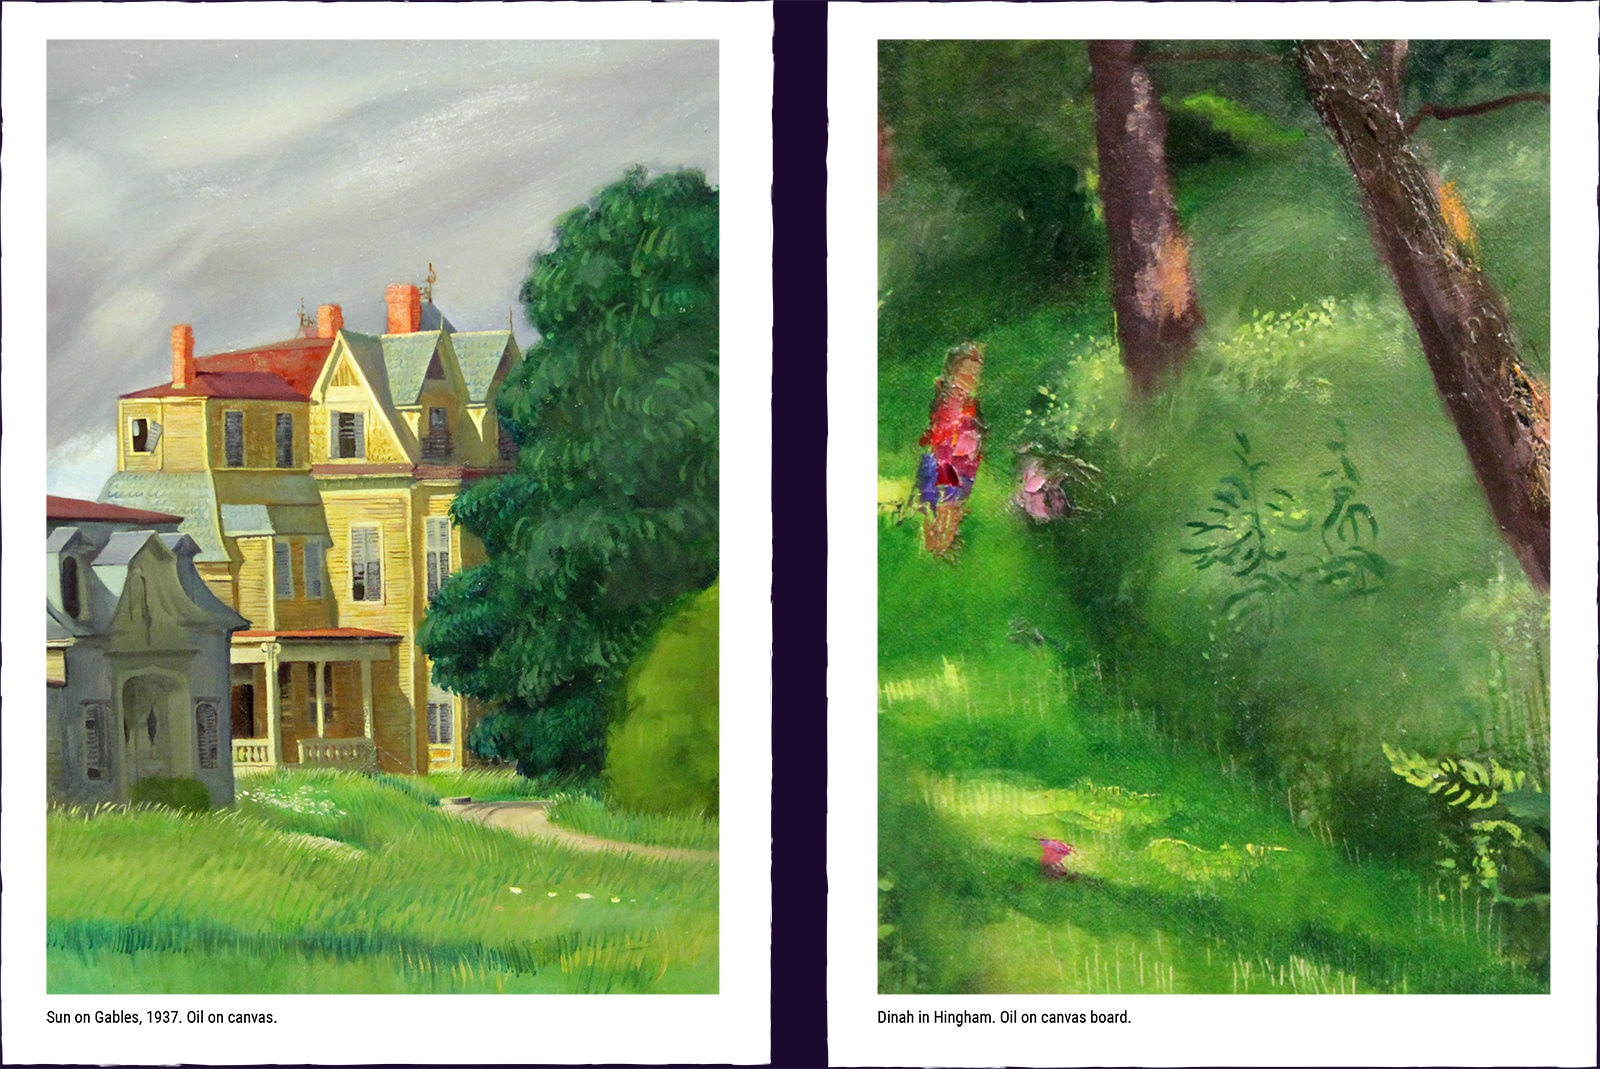 Two landscape paintings. (1) Sun on Gables, 1937. (2) Diana in Hingham. Oil on canvas board.